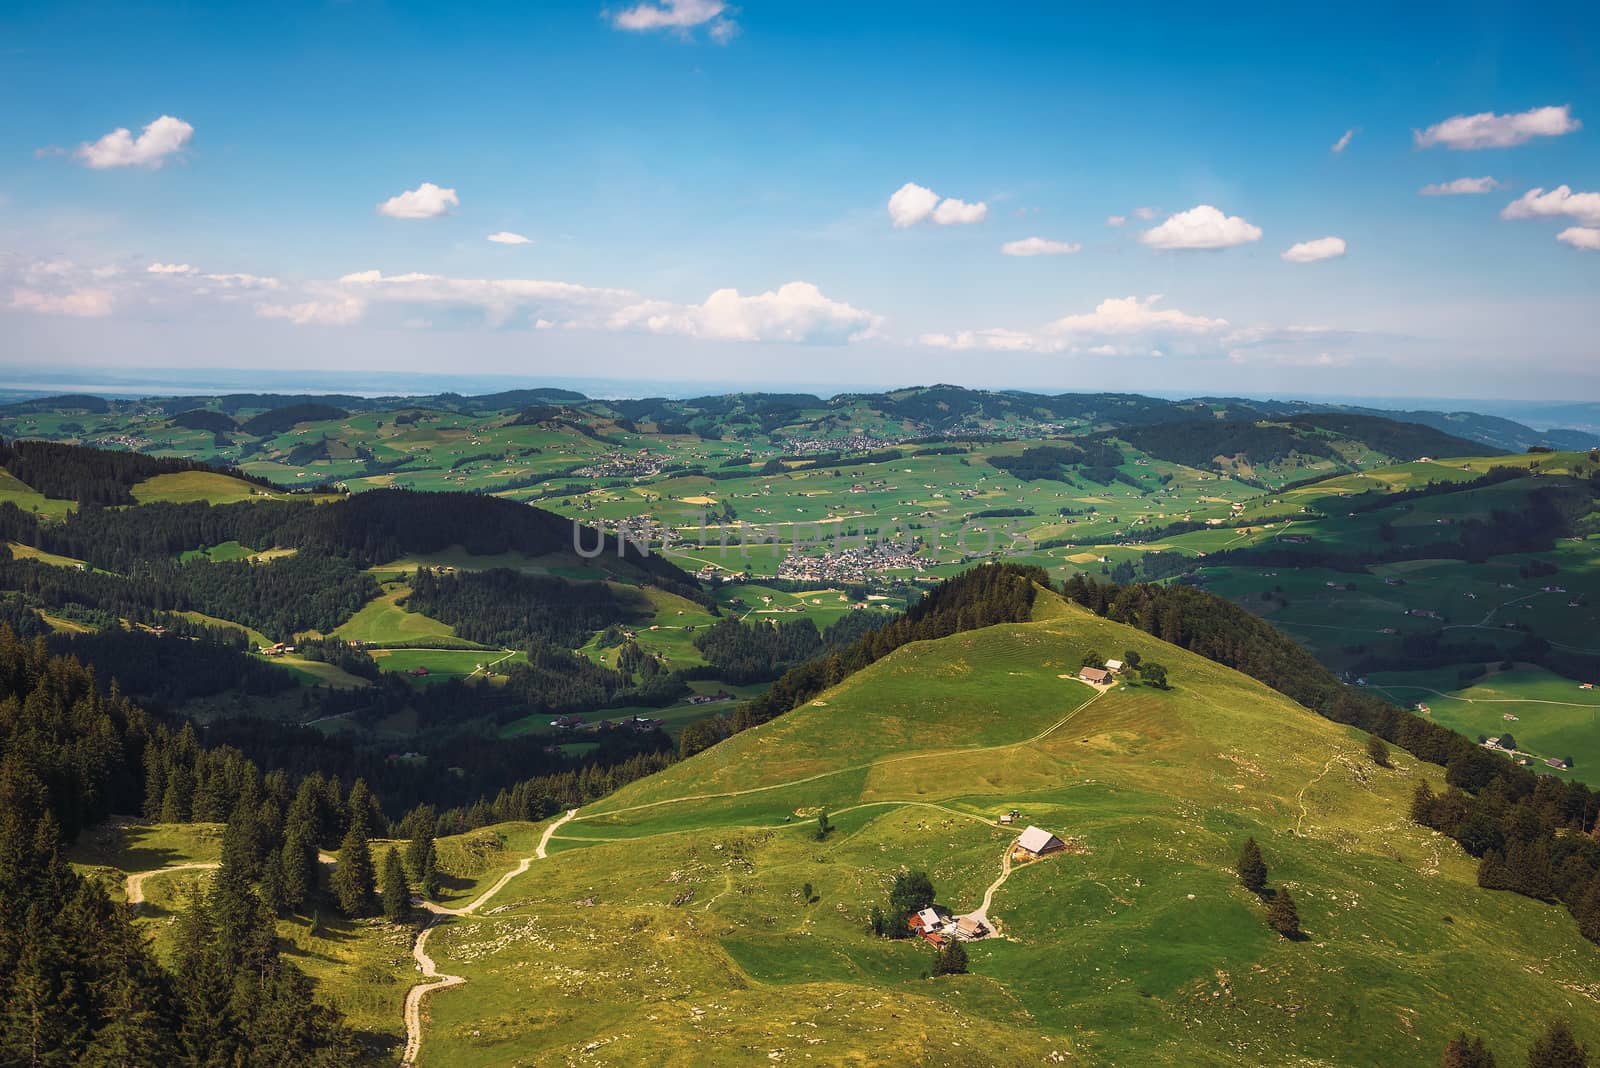 Panoramic views from the Ebenalp mountain over the valley in the Appenzell region of Switzerland